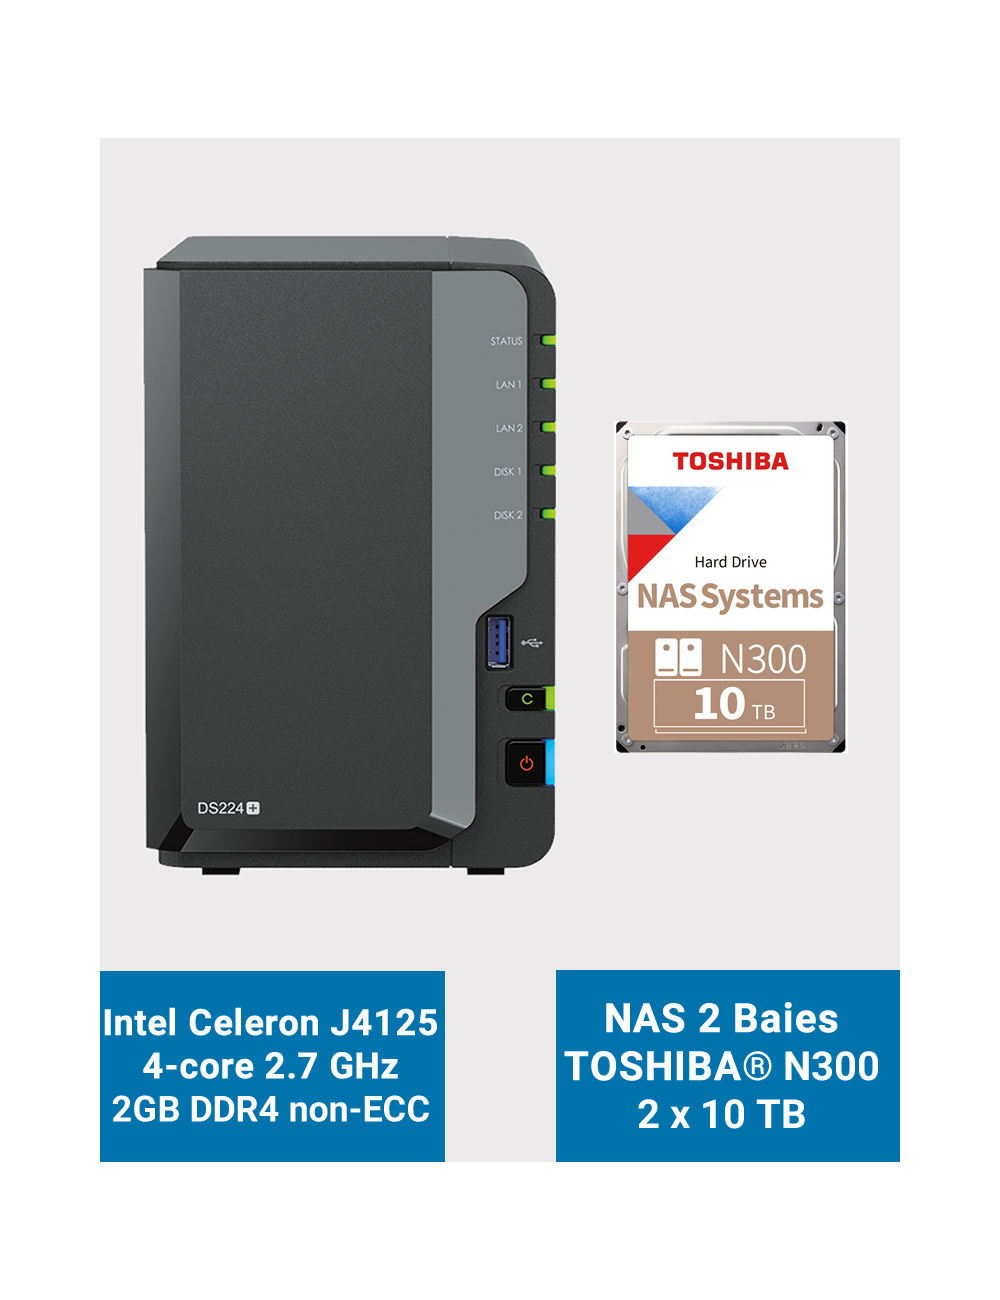 Synology DiskStation DS224+ 2Go Serveur NAS Toshiba N300 20To (2x10To)